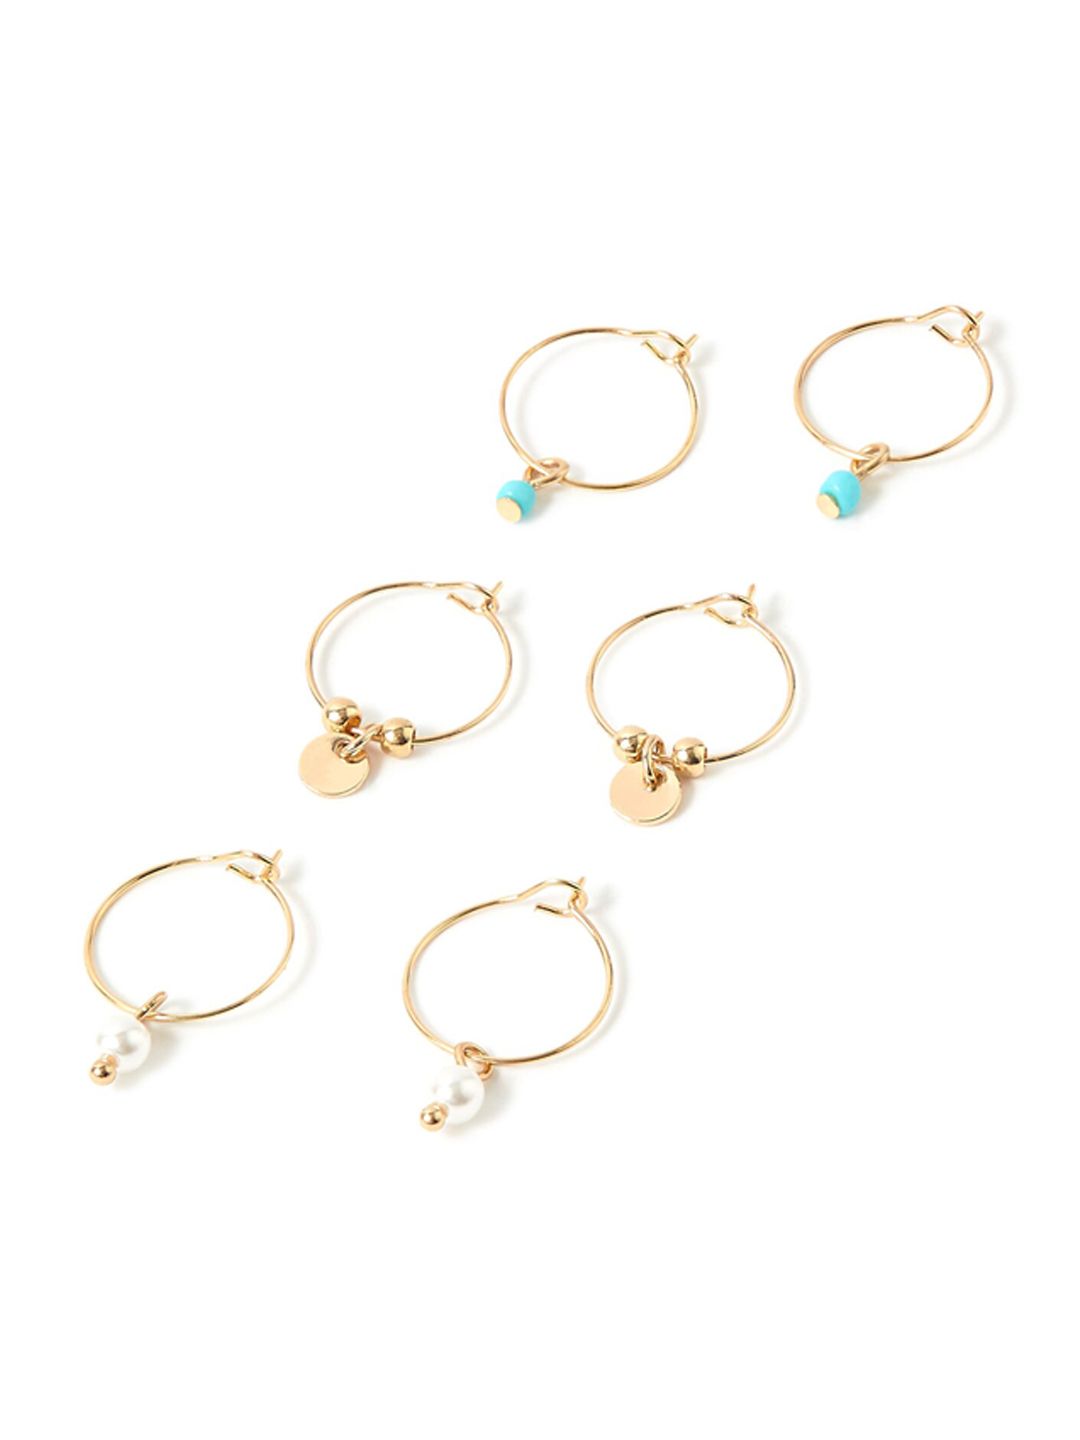 Accessorize Women Set Of 3 Gold-Toned Turquoise & Pearl Hoop Earrings Price in India